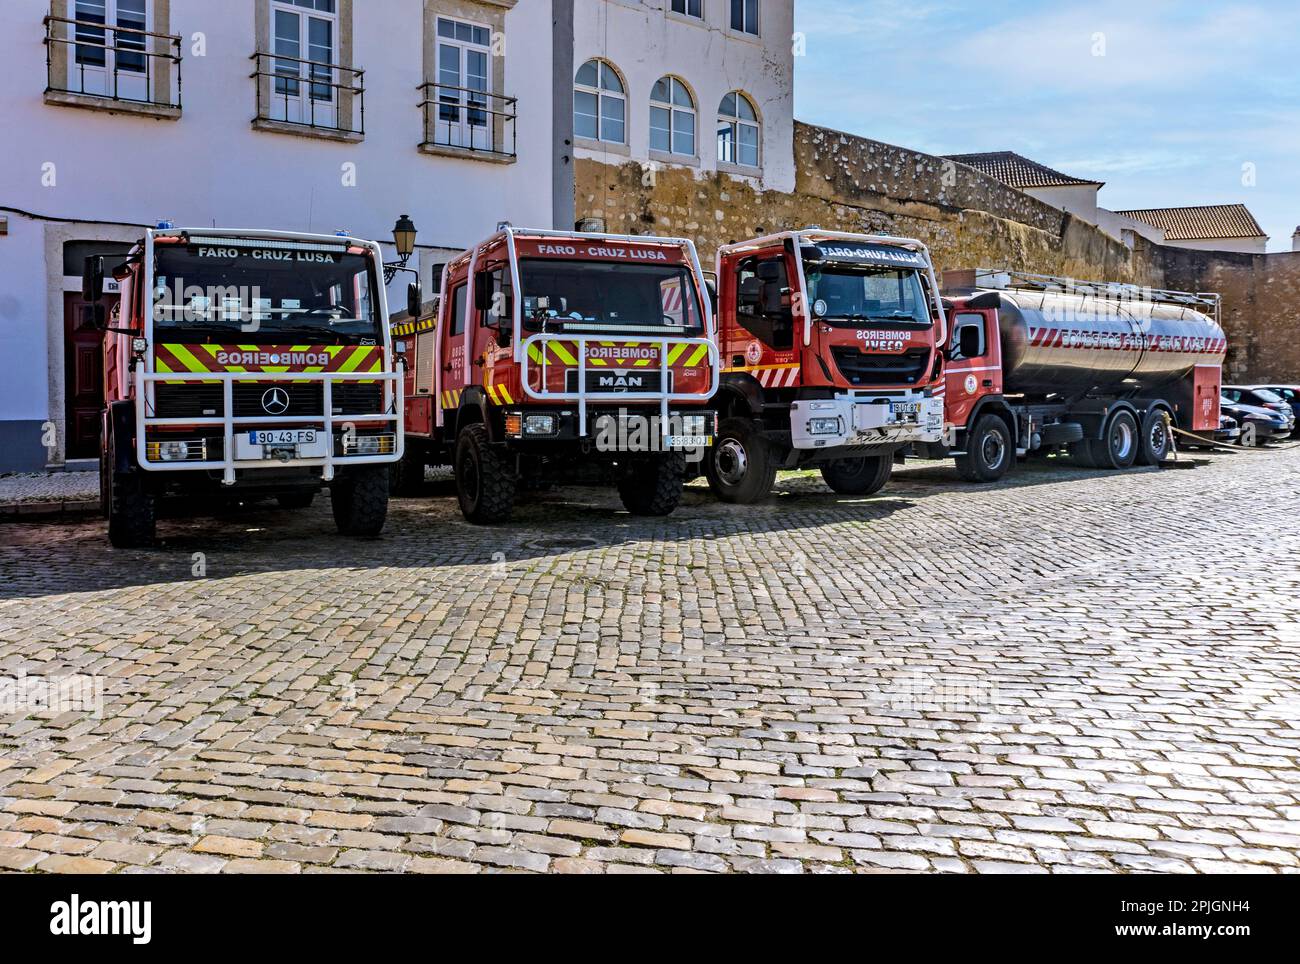 Emergency service vehicles lined up outside their depot in Faro, Portugal. Stock Photo